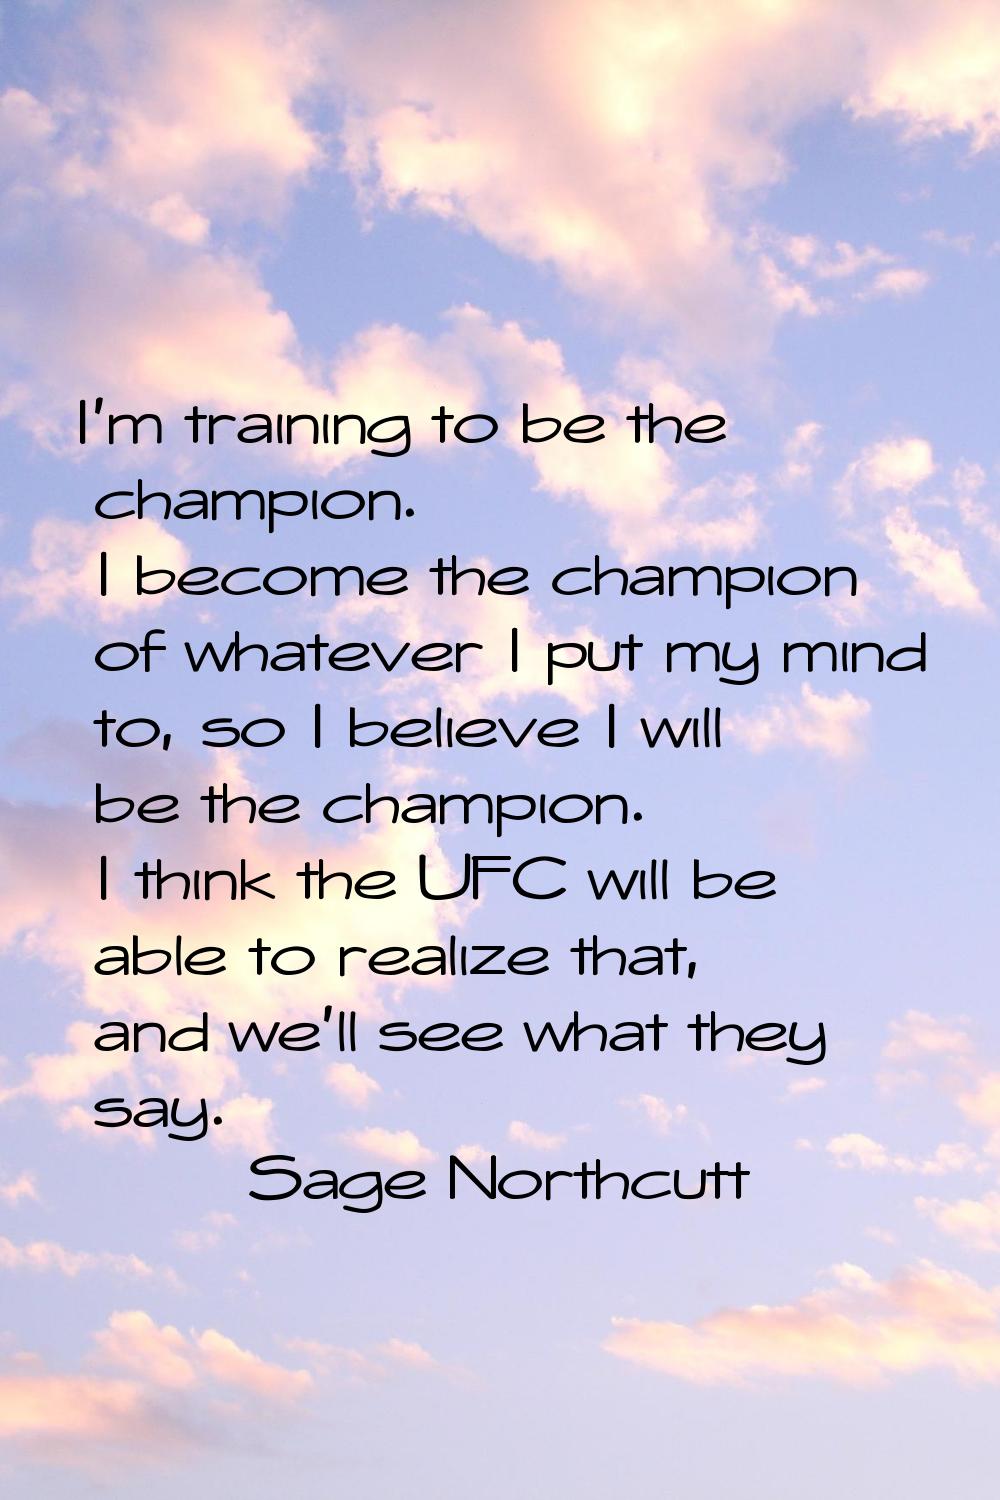 I'm training to be the champion. I become the champion of whatever I put my mind to, so I believe I